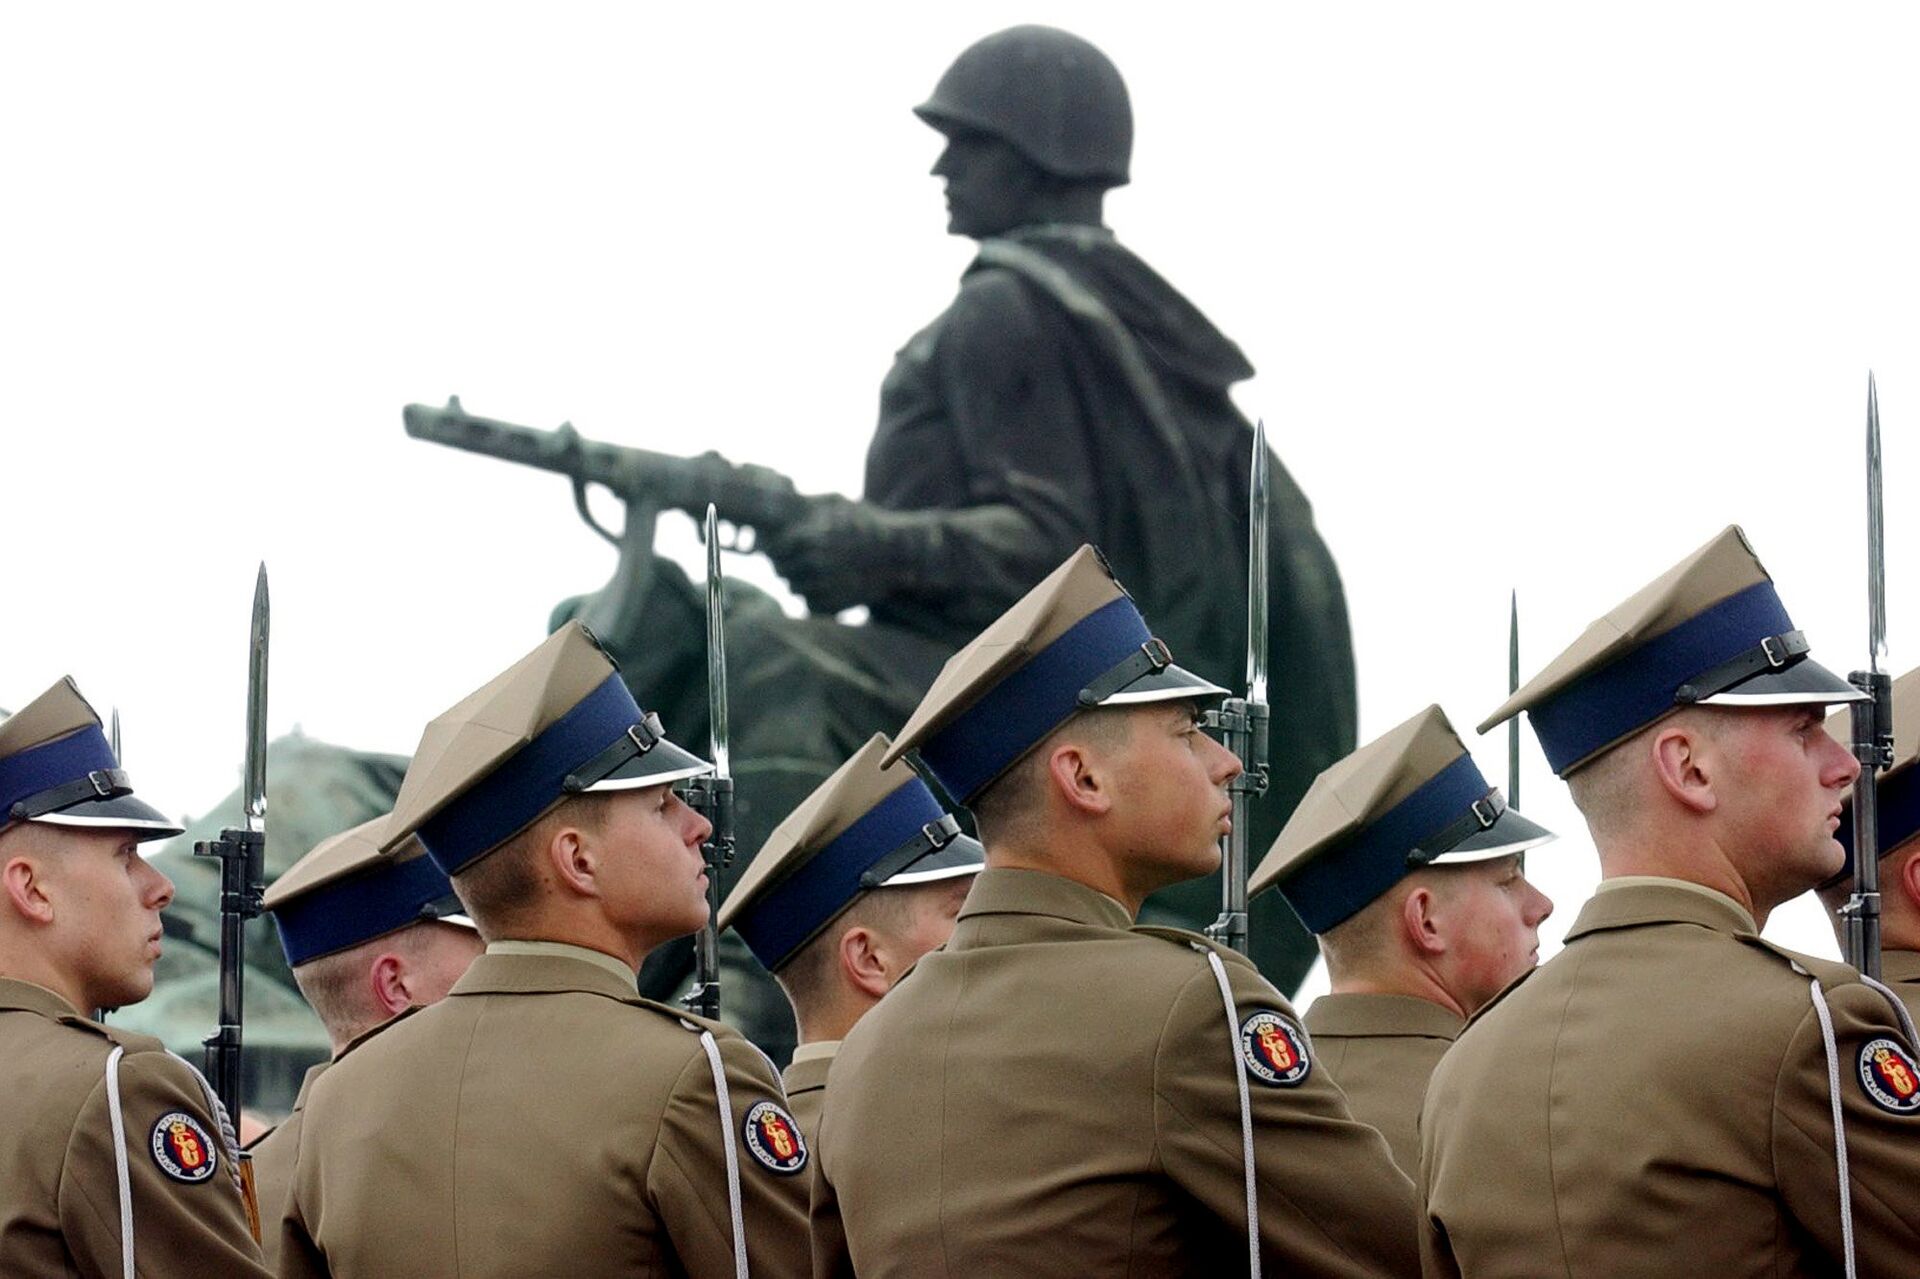 Polish Army soldiers stand to attention during a wreath laying ceremony marking the 62nd anniversary of the end of WWII in Europe, at the Soviet Army cemetery in Warsaw, Poland, Wednesday, May 9, 2007 - Sputnik International, 1920, 20.02.2023